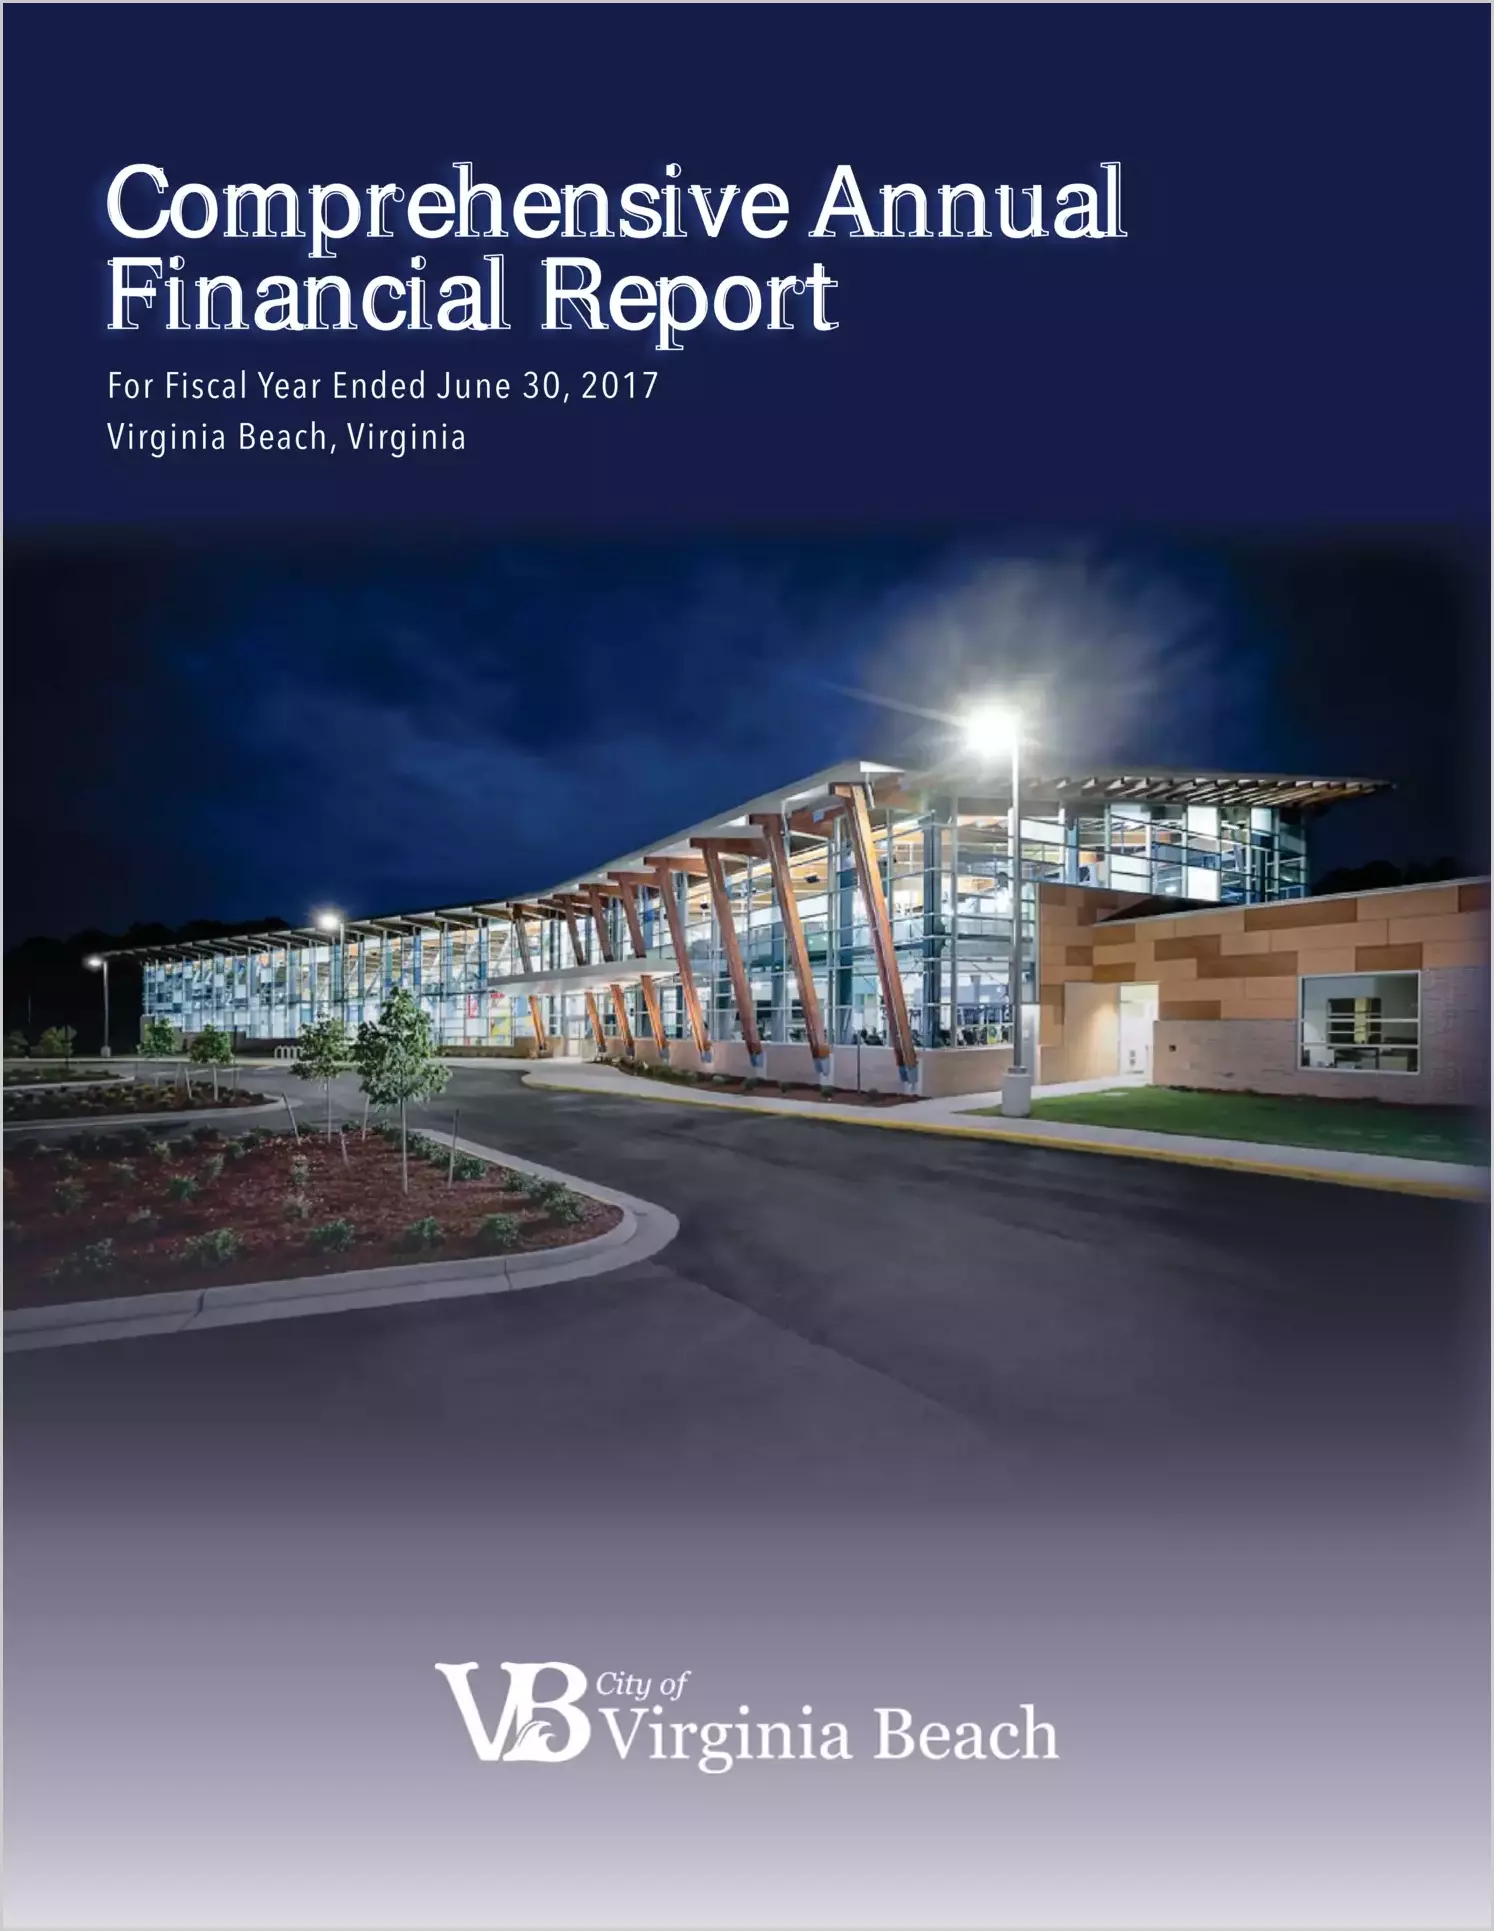 2017 Annual Financial Report for City of Virginia Beach